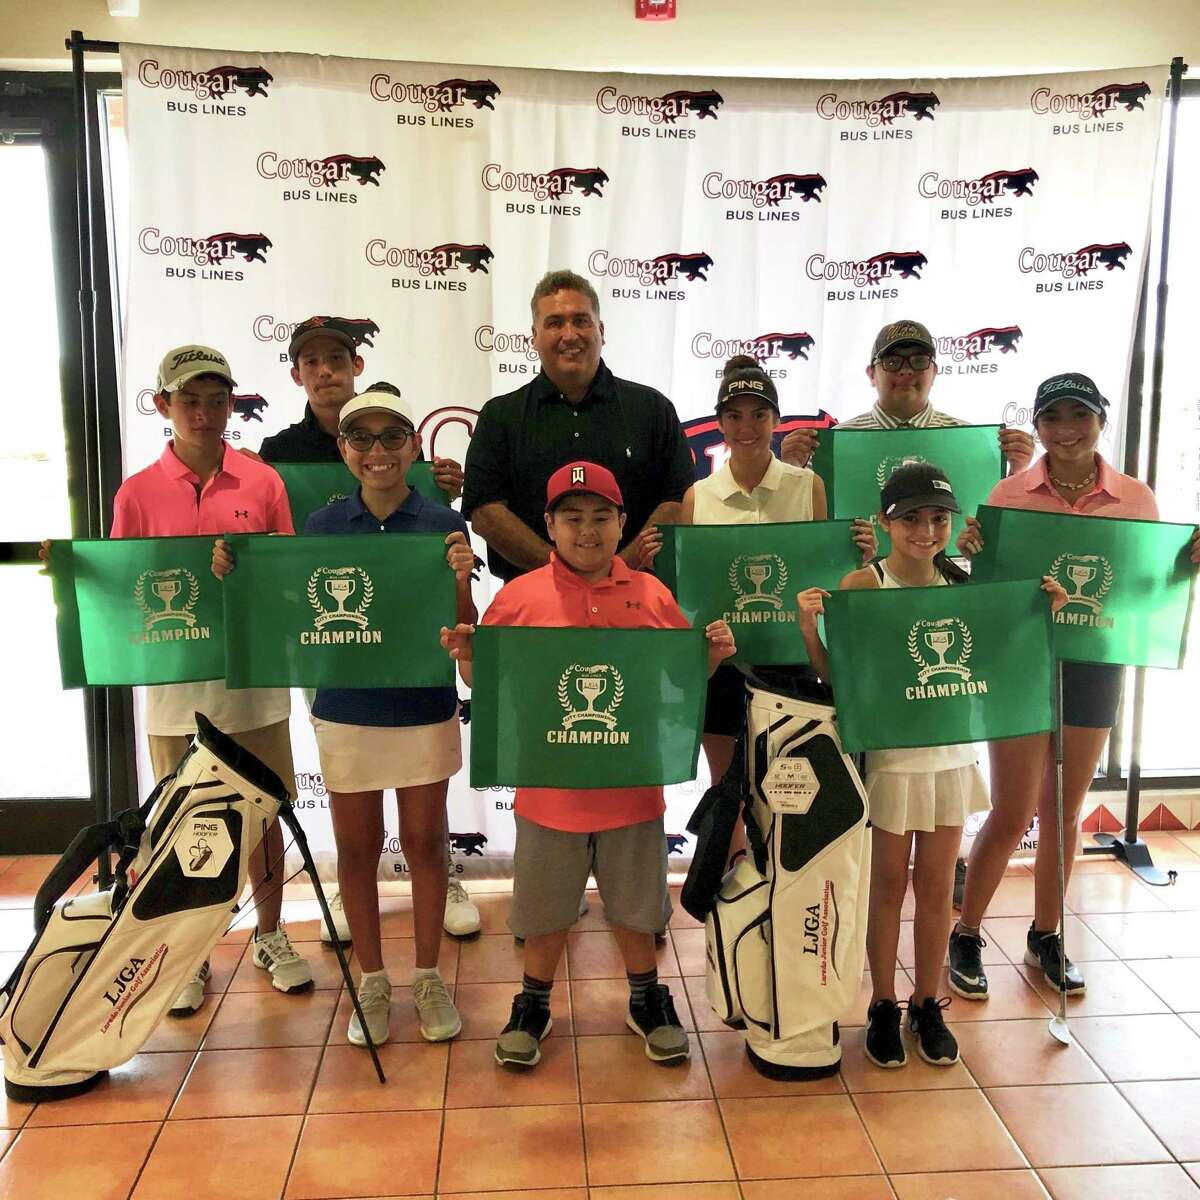 Golfers competed in 11 divisions Monday at the Max A. Mandel Municipal Golf Course in the third event of the 2019 LJGA Summer Tour.